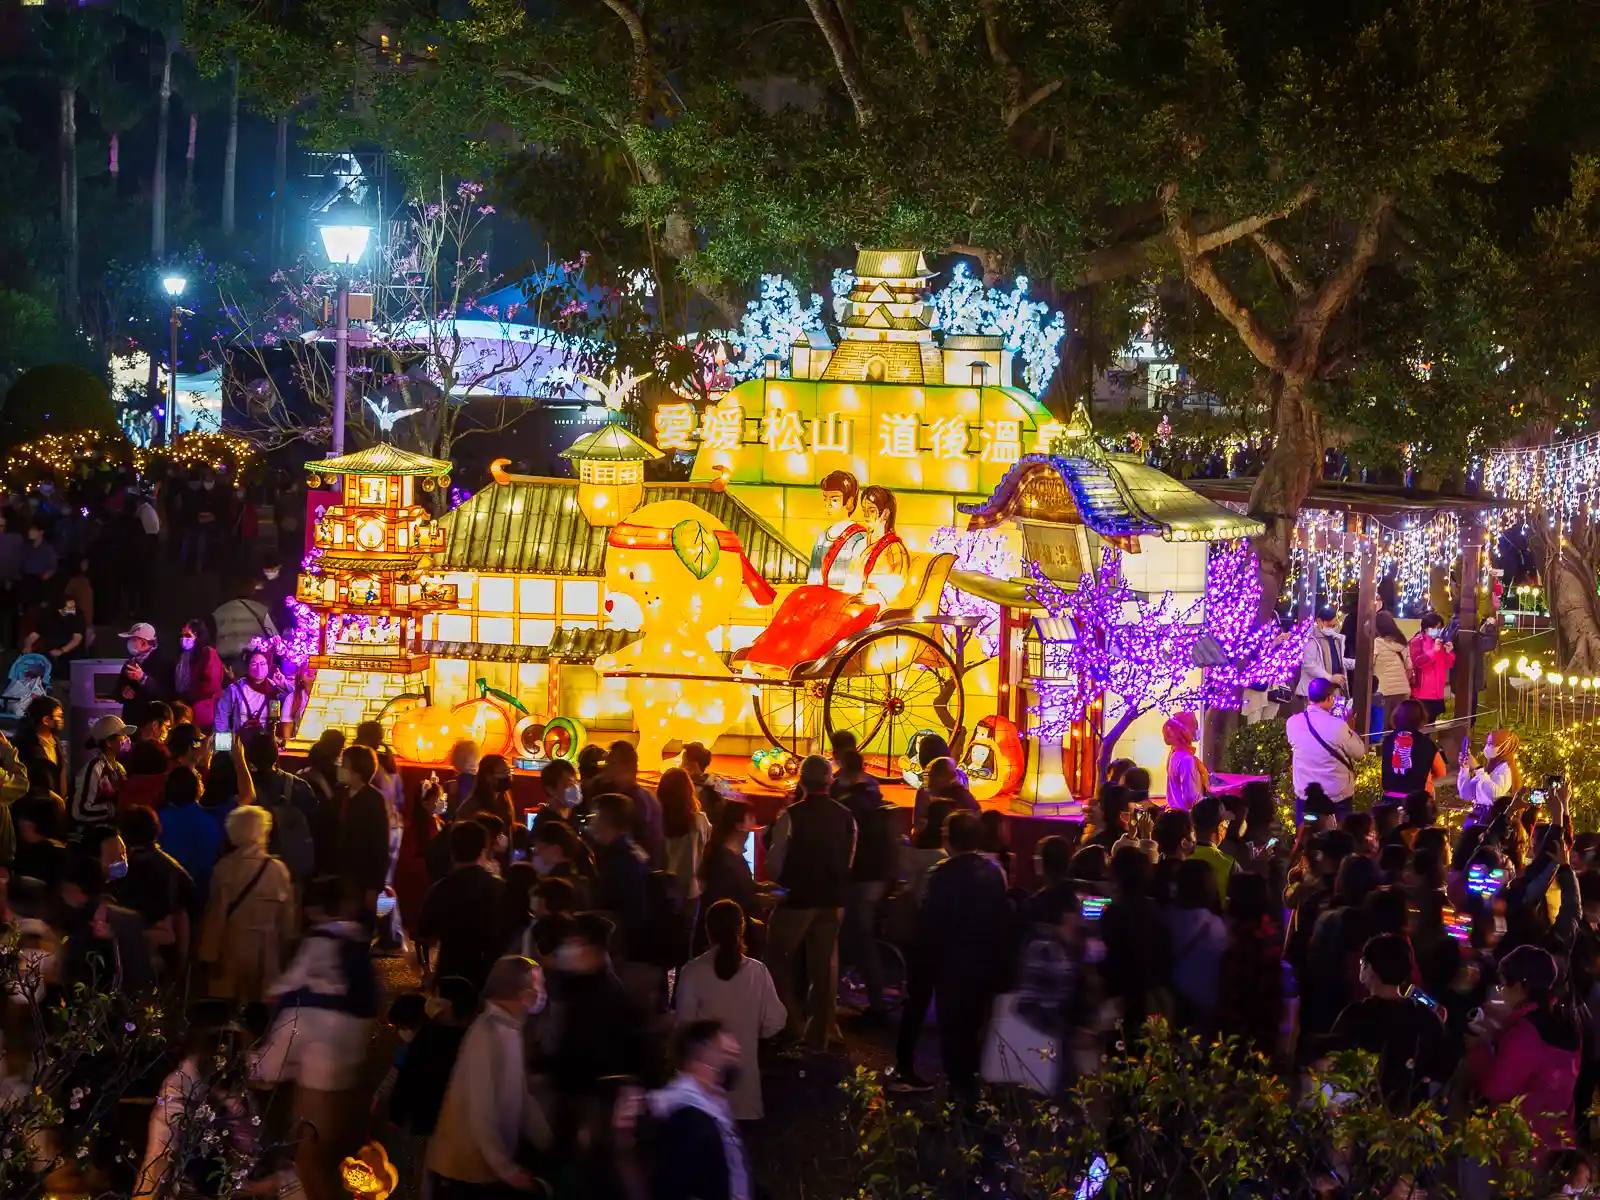 Crowds move around a lantern display which combines temples, figures, animals, and fruits.